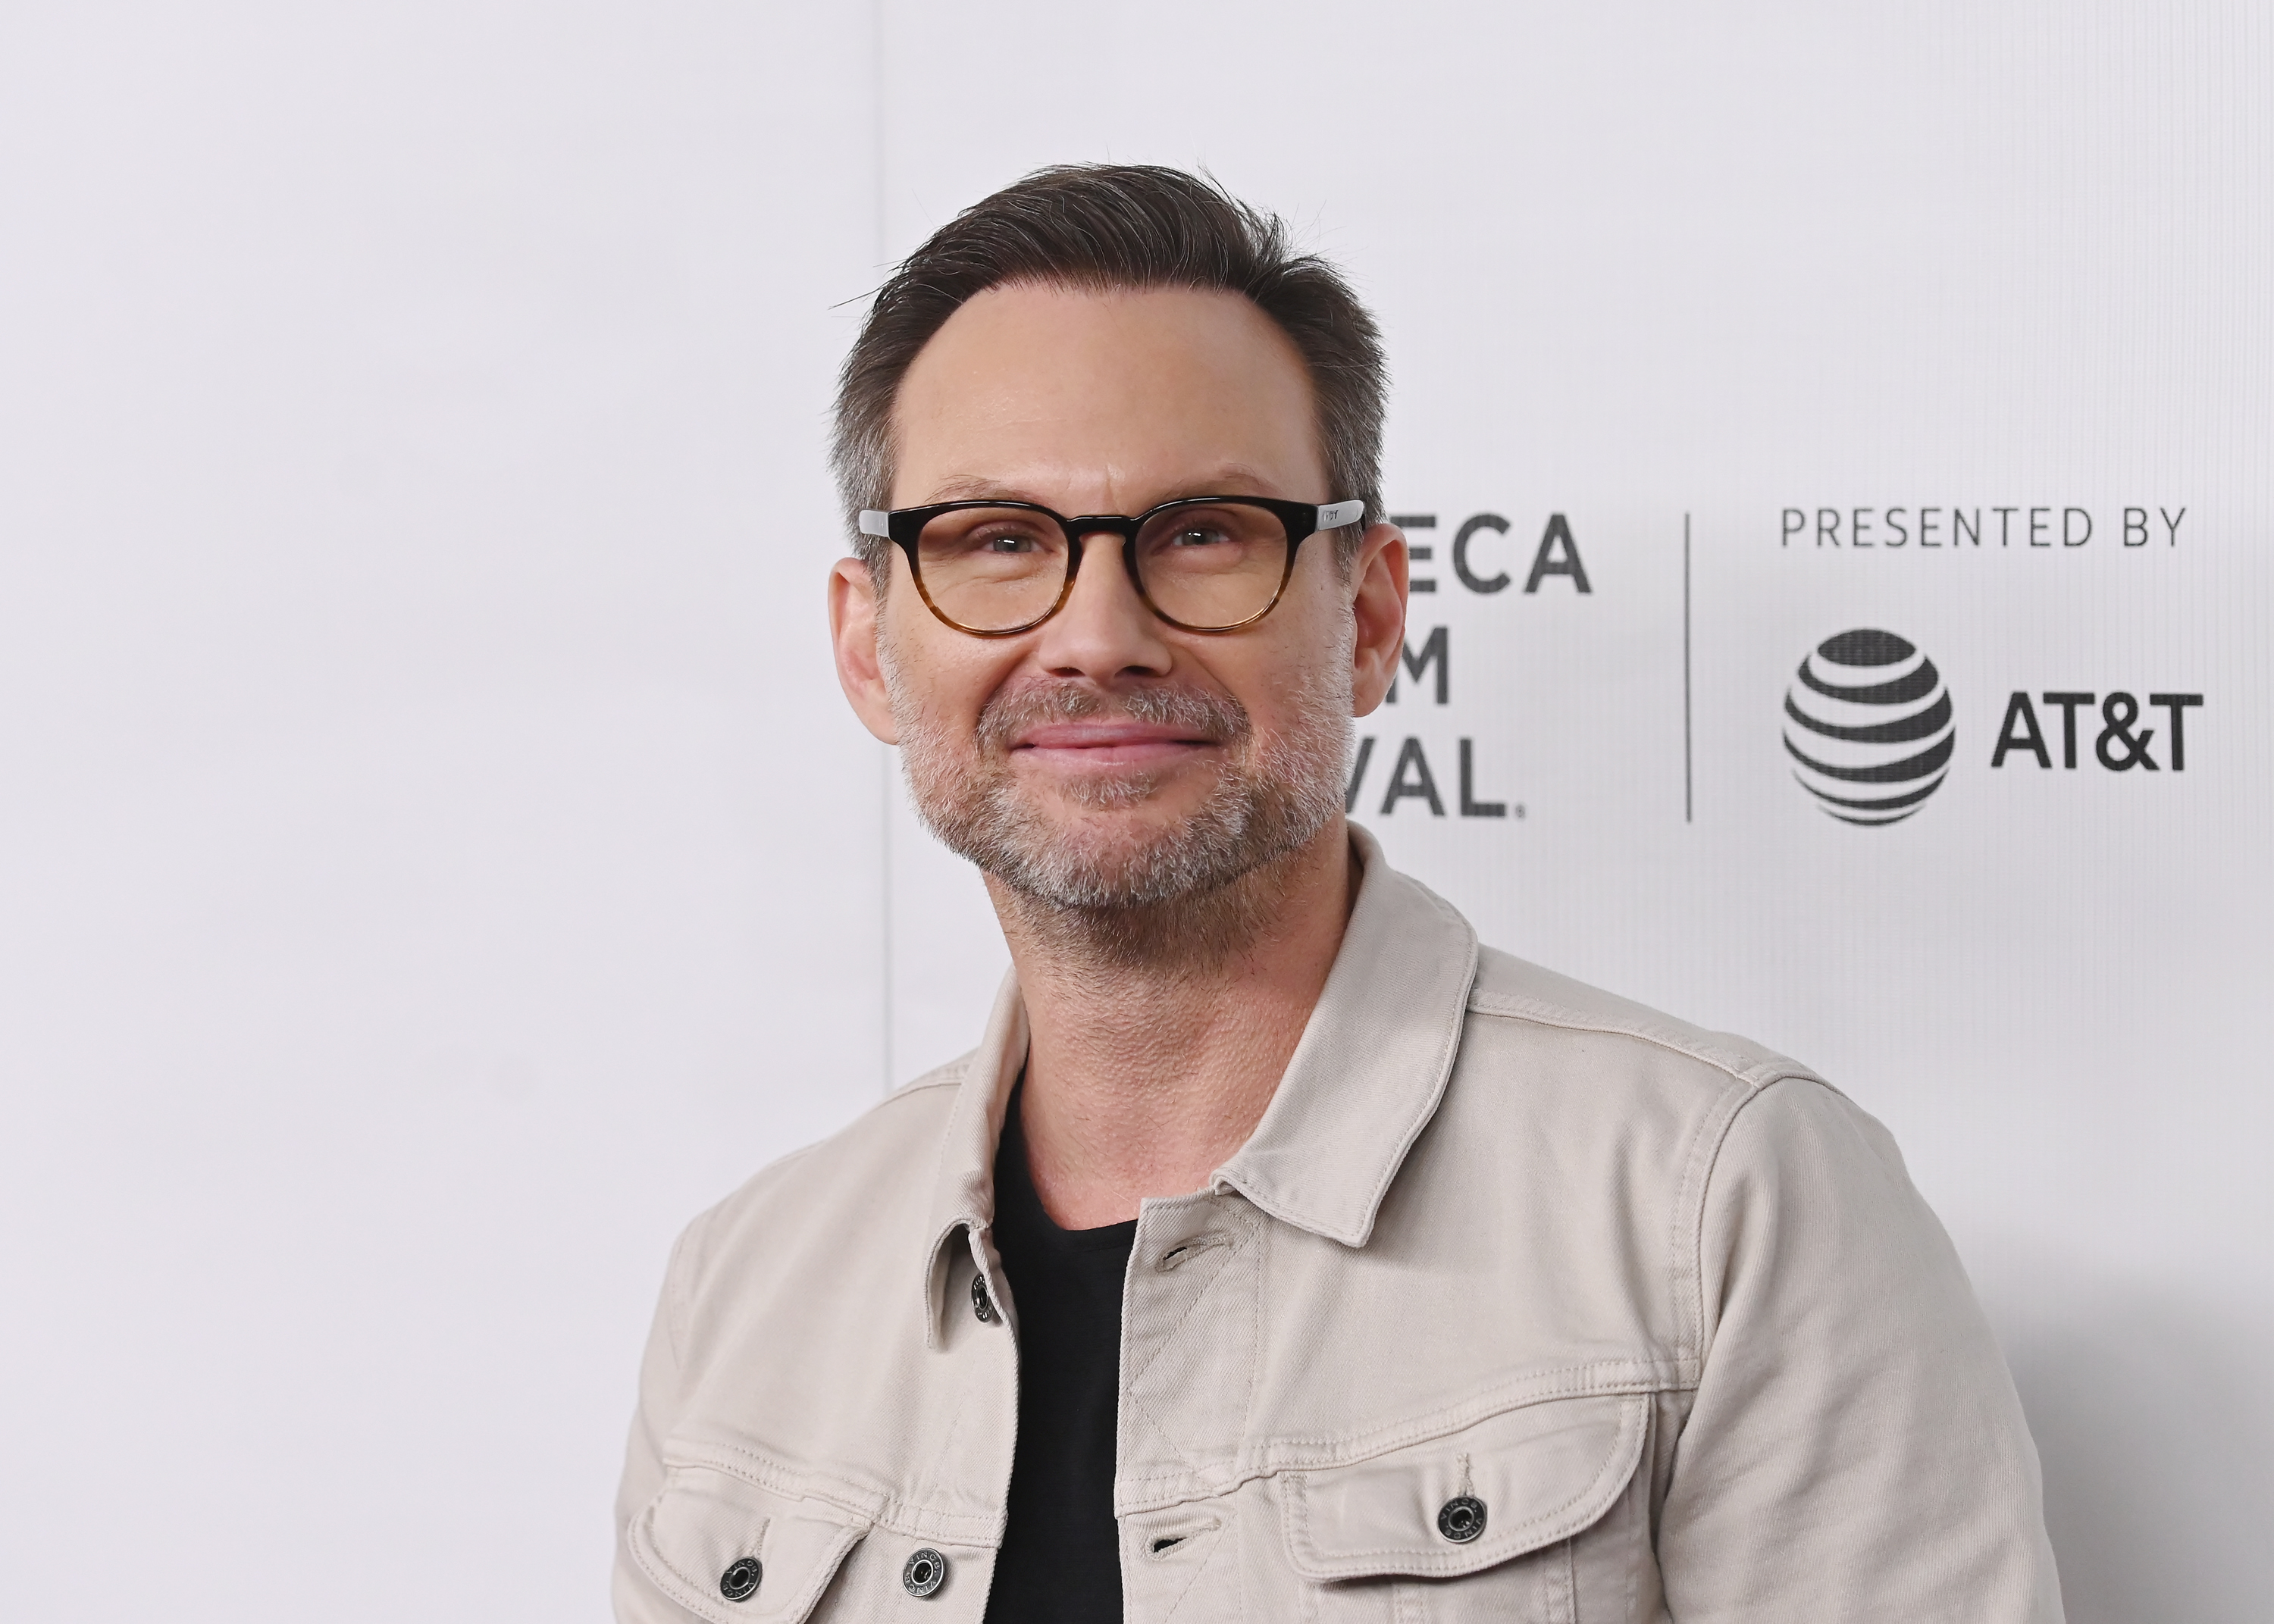 Christian Slater Joins The Cast Of Disney’s ‘Willow’ Series